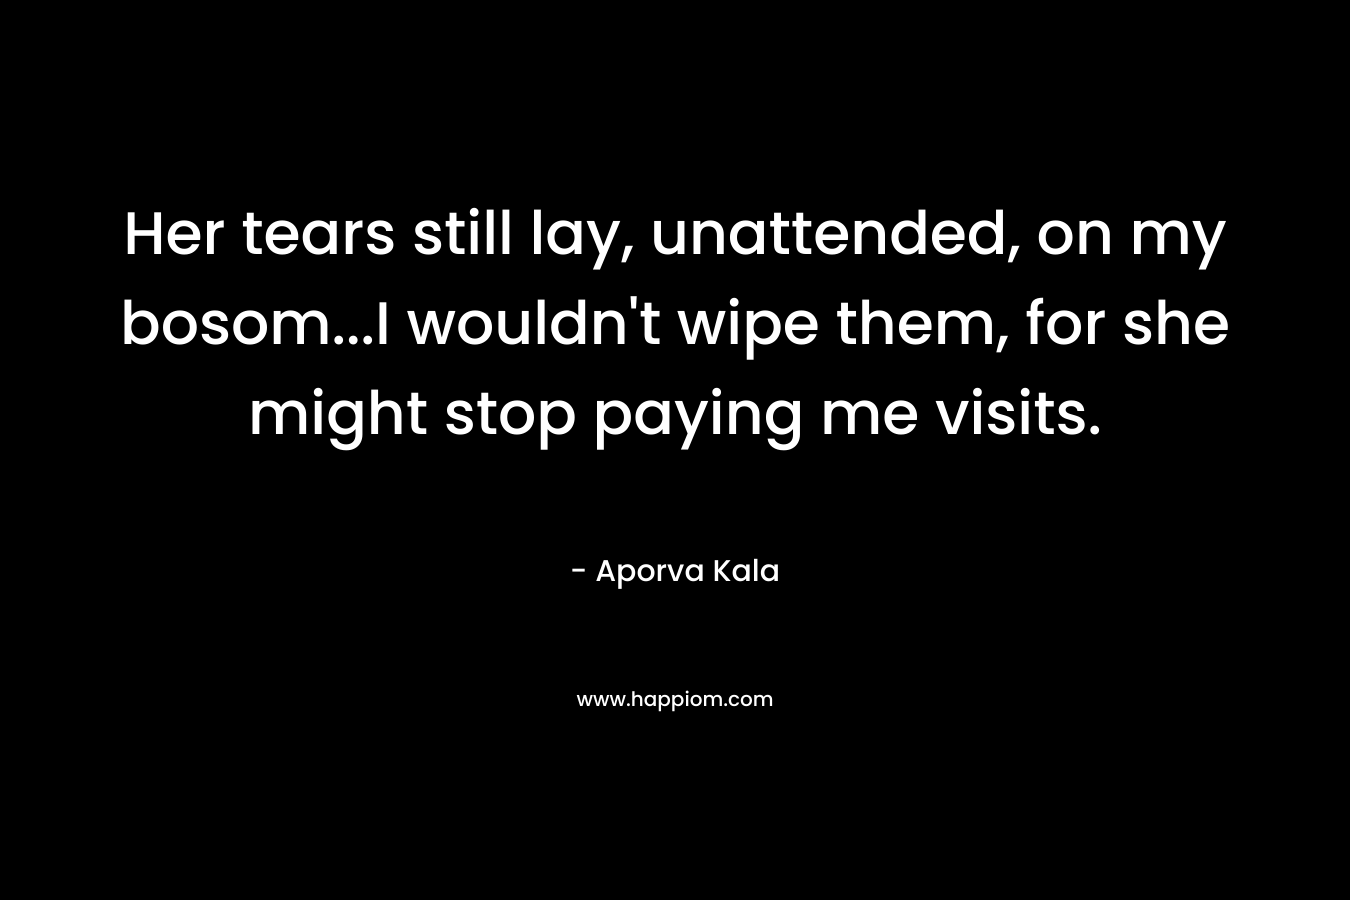 Her tears still lay, unattended, on my bosom…I wouldn’t wipe them, for she might stop paying me visits. – Aporva Kala